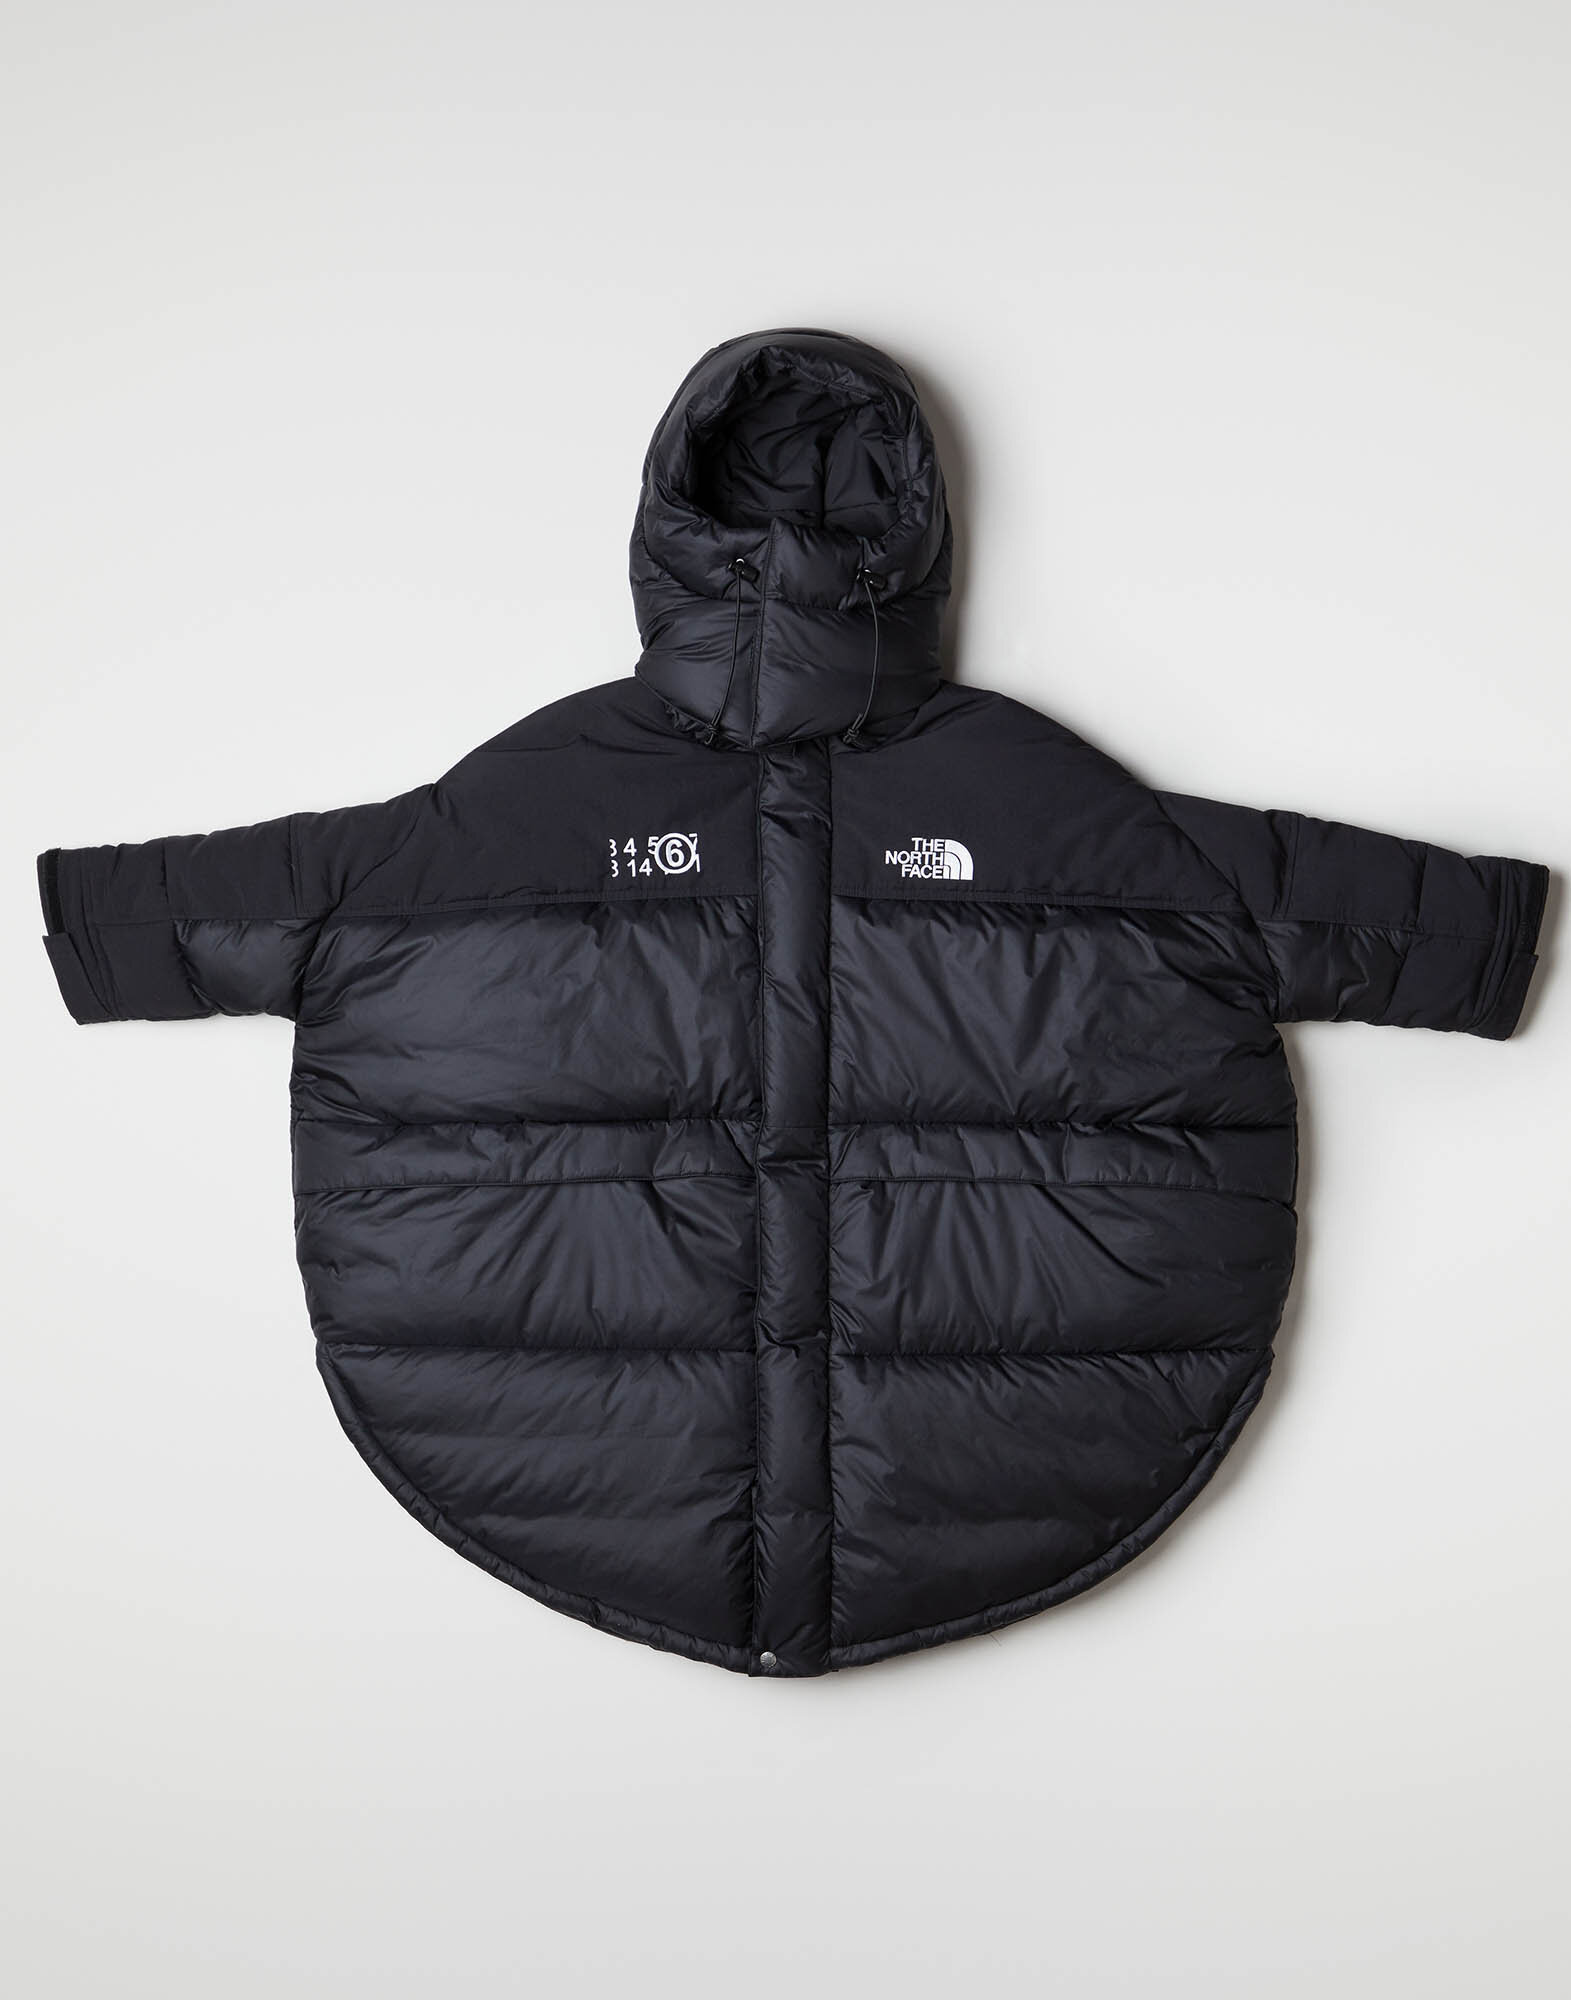 MM6 / The North Face Collection 